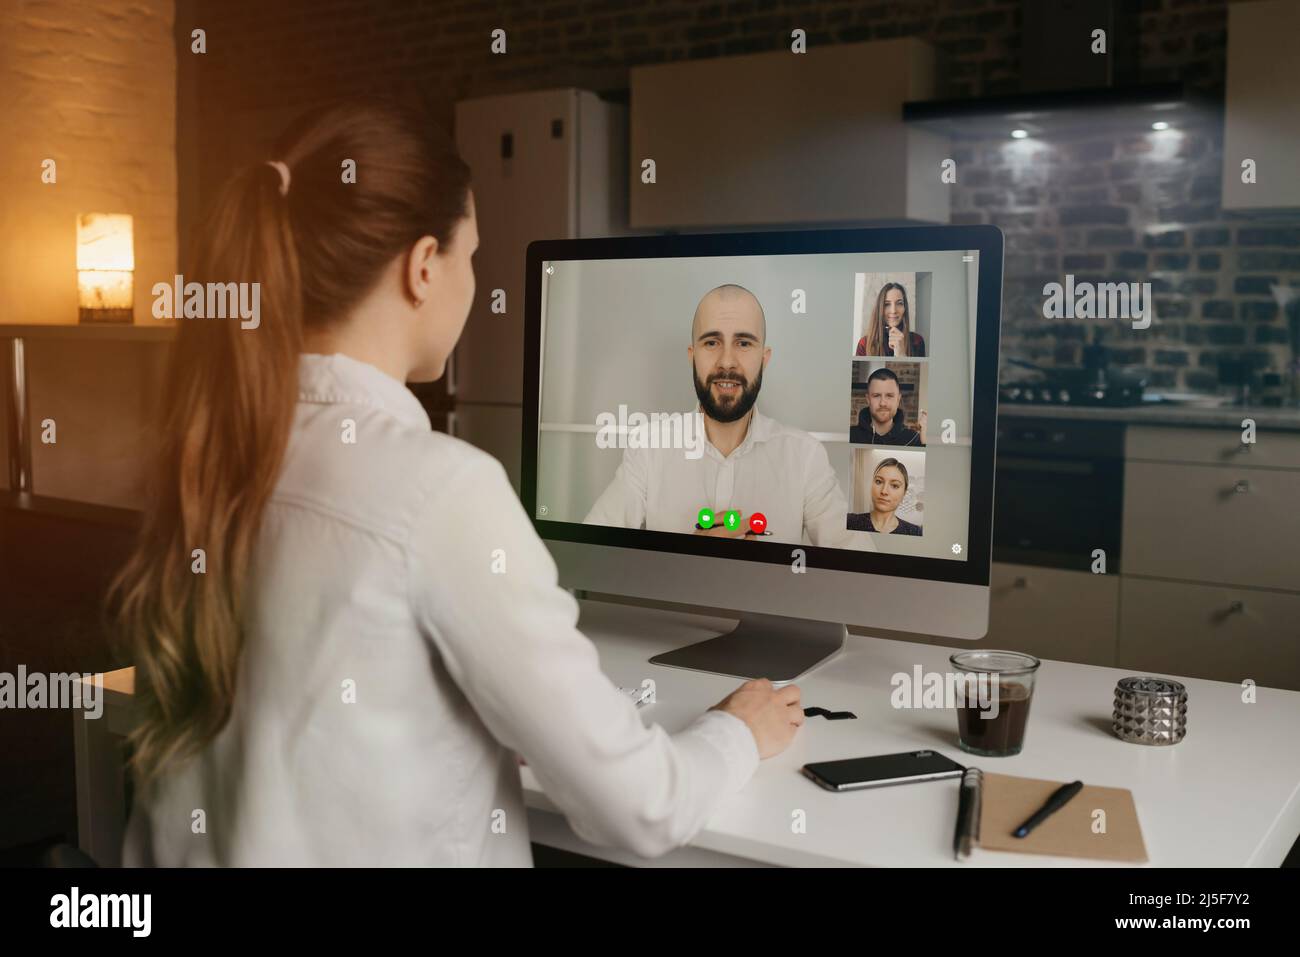 Back view of woman talking to her colleagues in a video conference on computer. Stock Photo